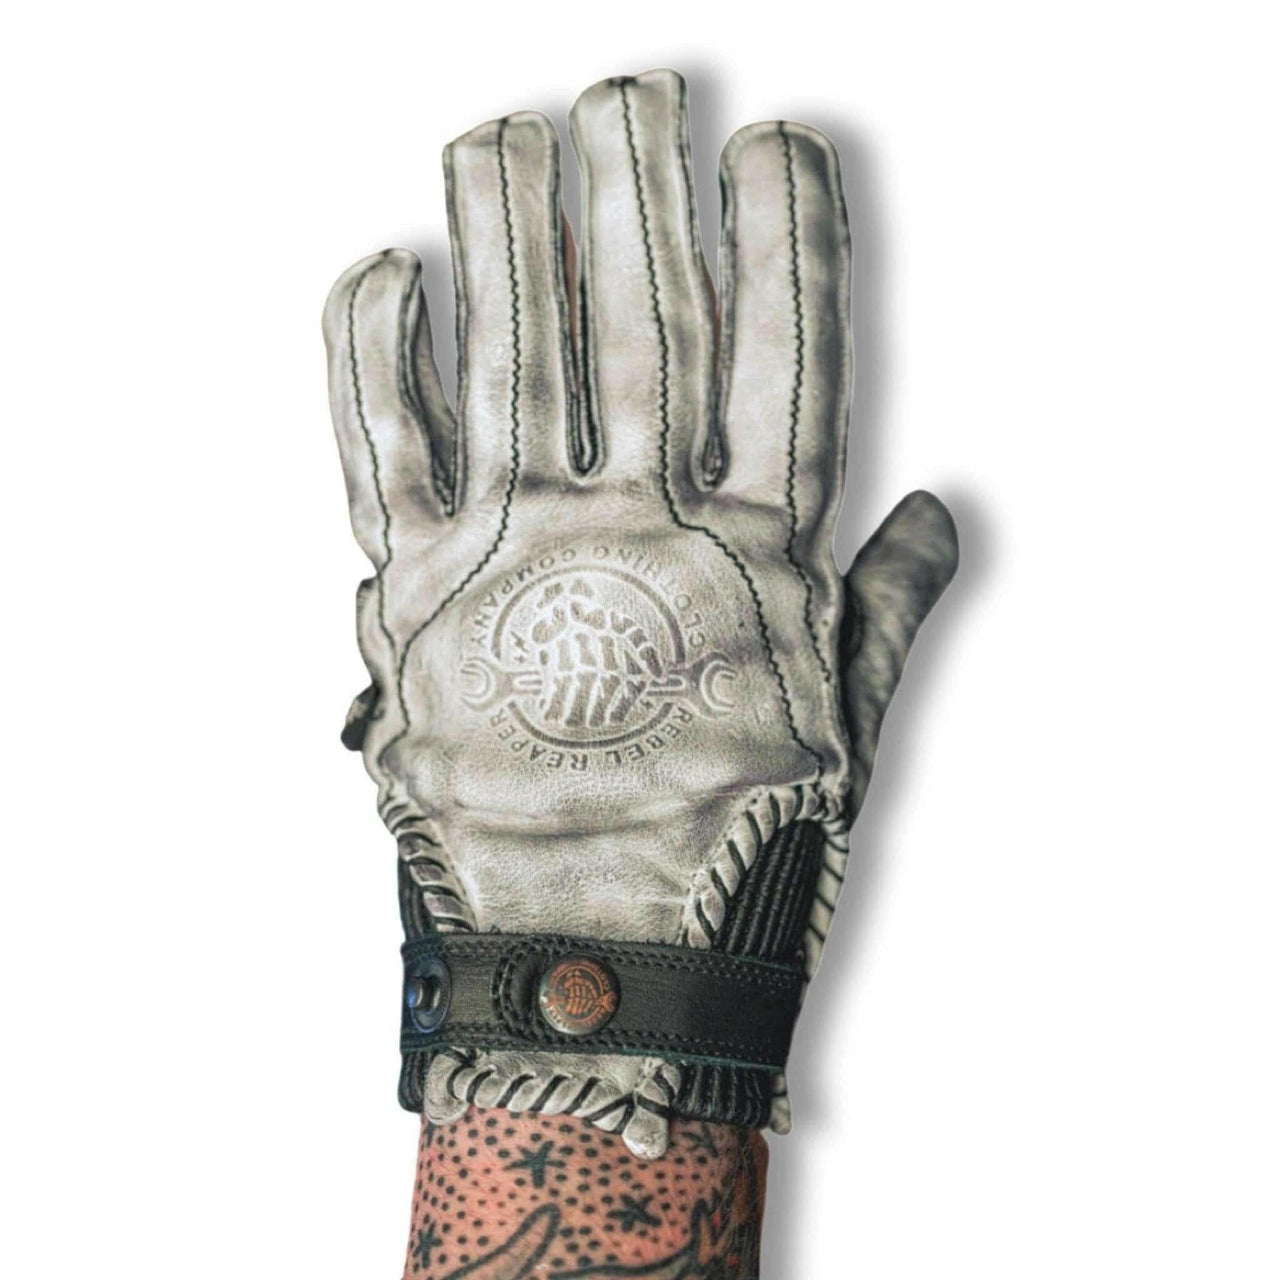 Leather Motorcycle Riding Gloves - Modern Roper - Distressed White